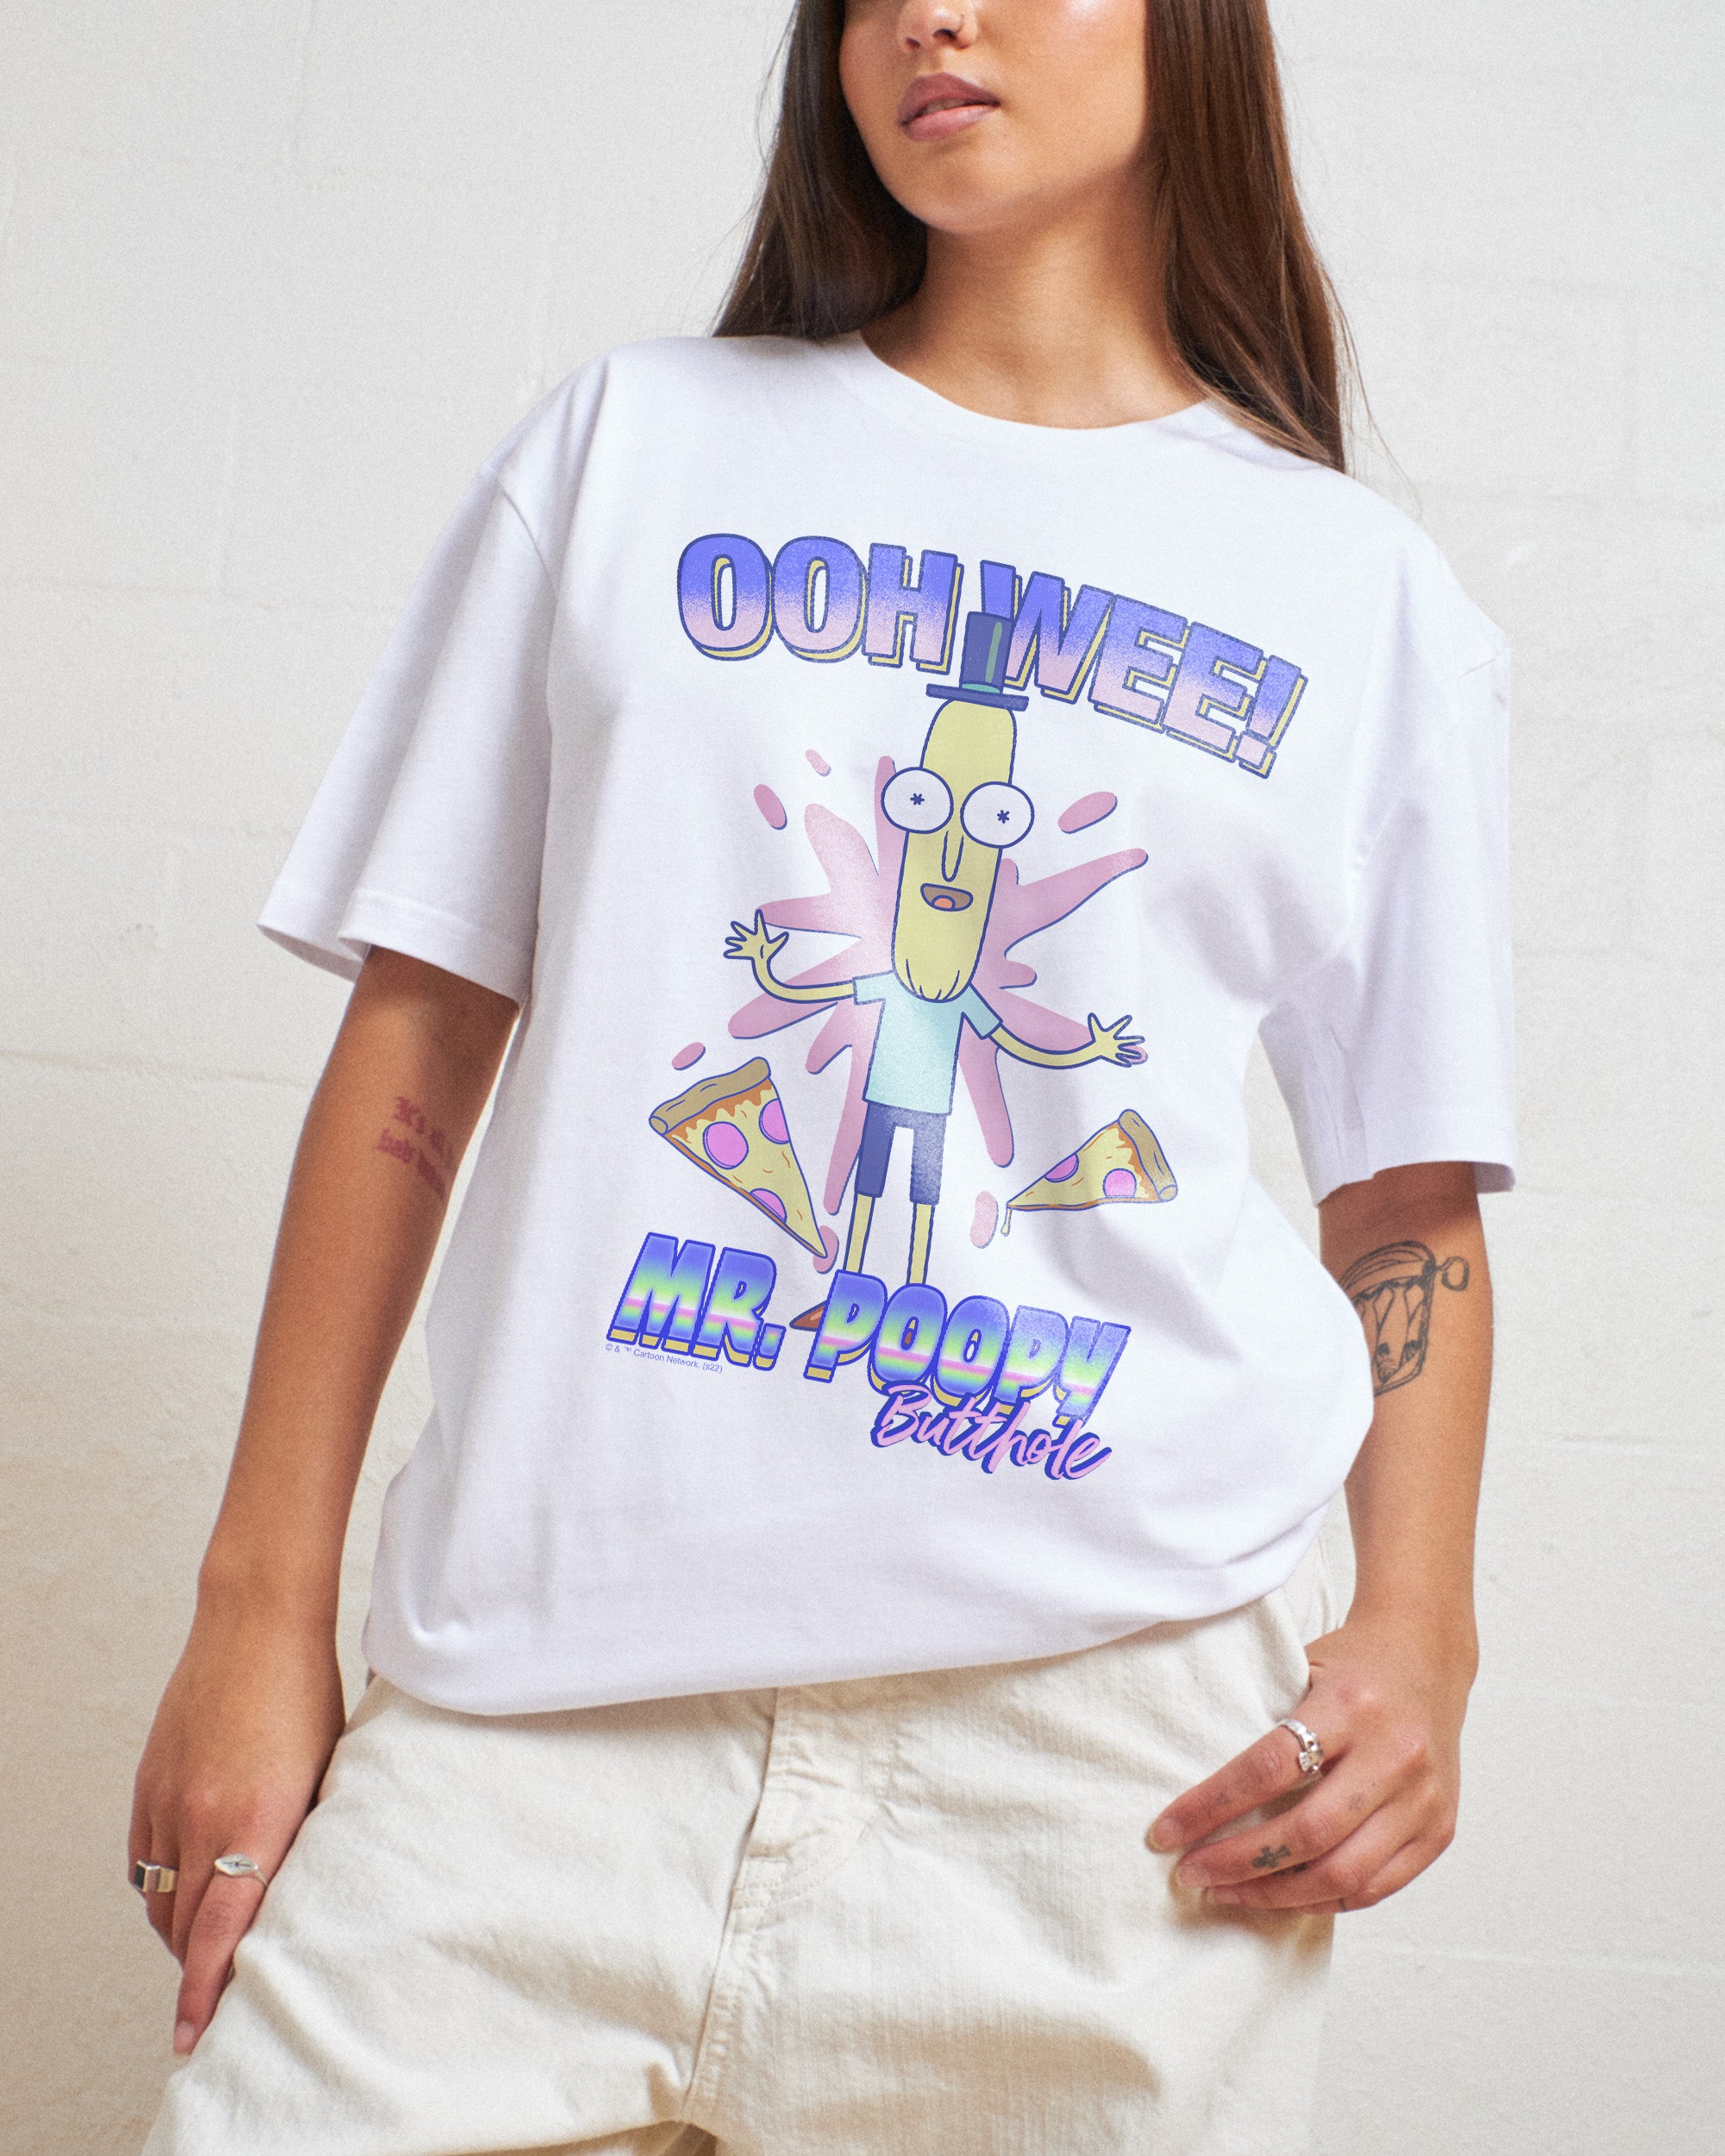 Mr Poopy Butthole T-Shirt